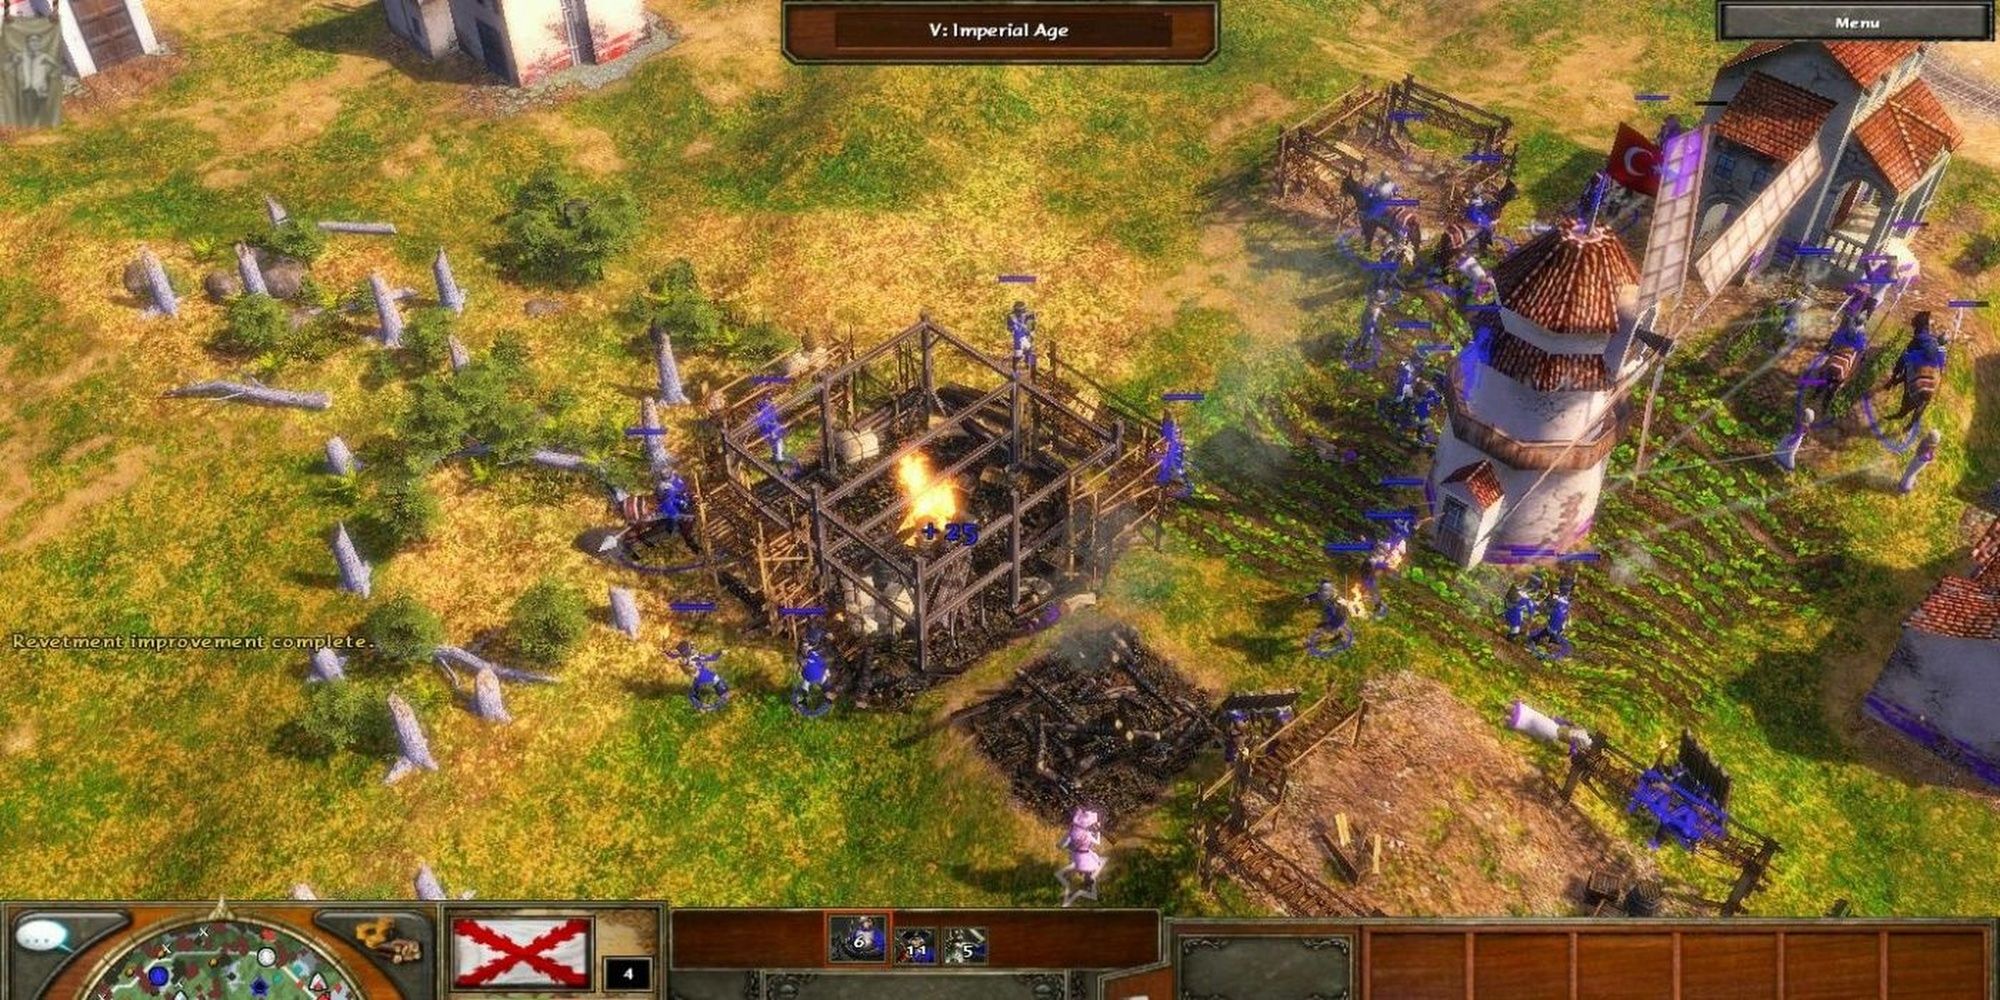 age of empires 3 limit population